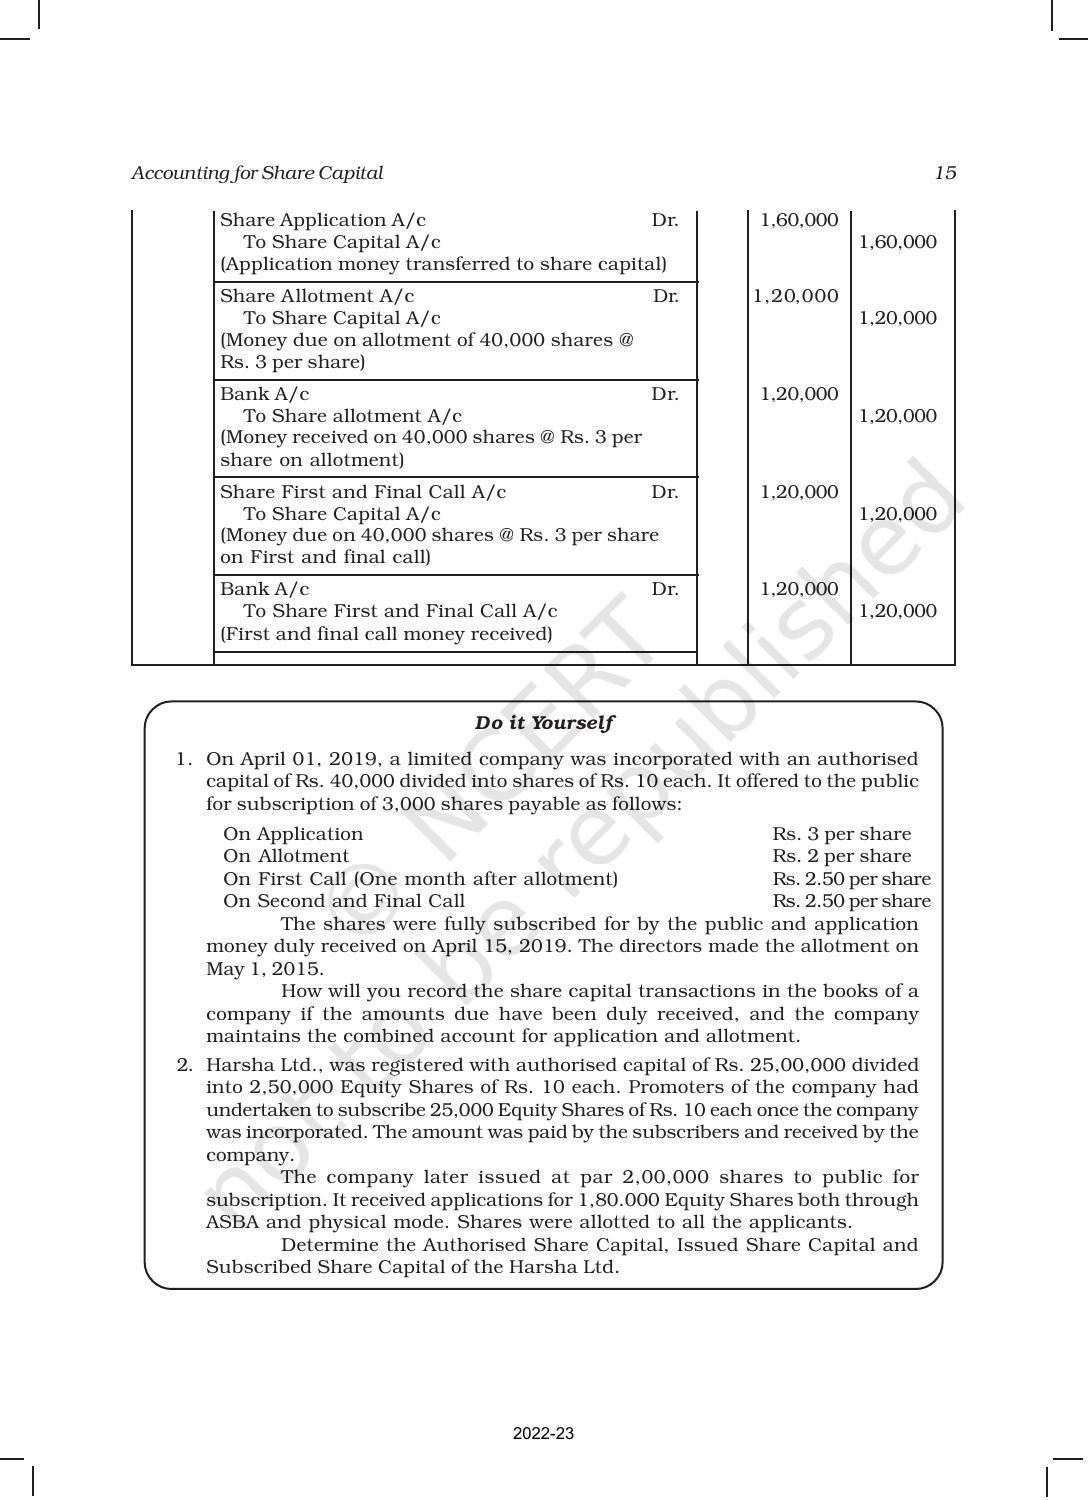 NCERT Book for Class 12 Accountancy Part II Chapter 1 Accounting for Share Capital - Page 15